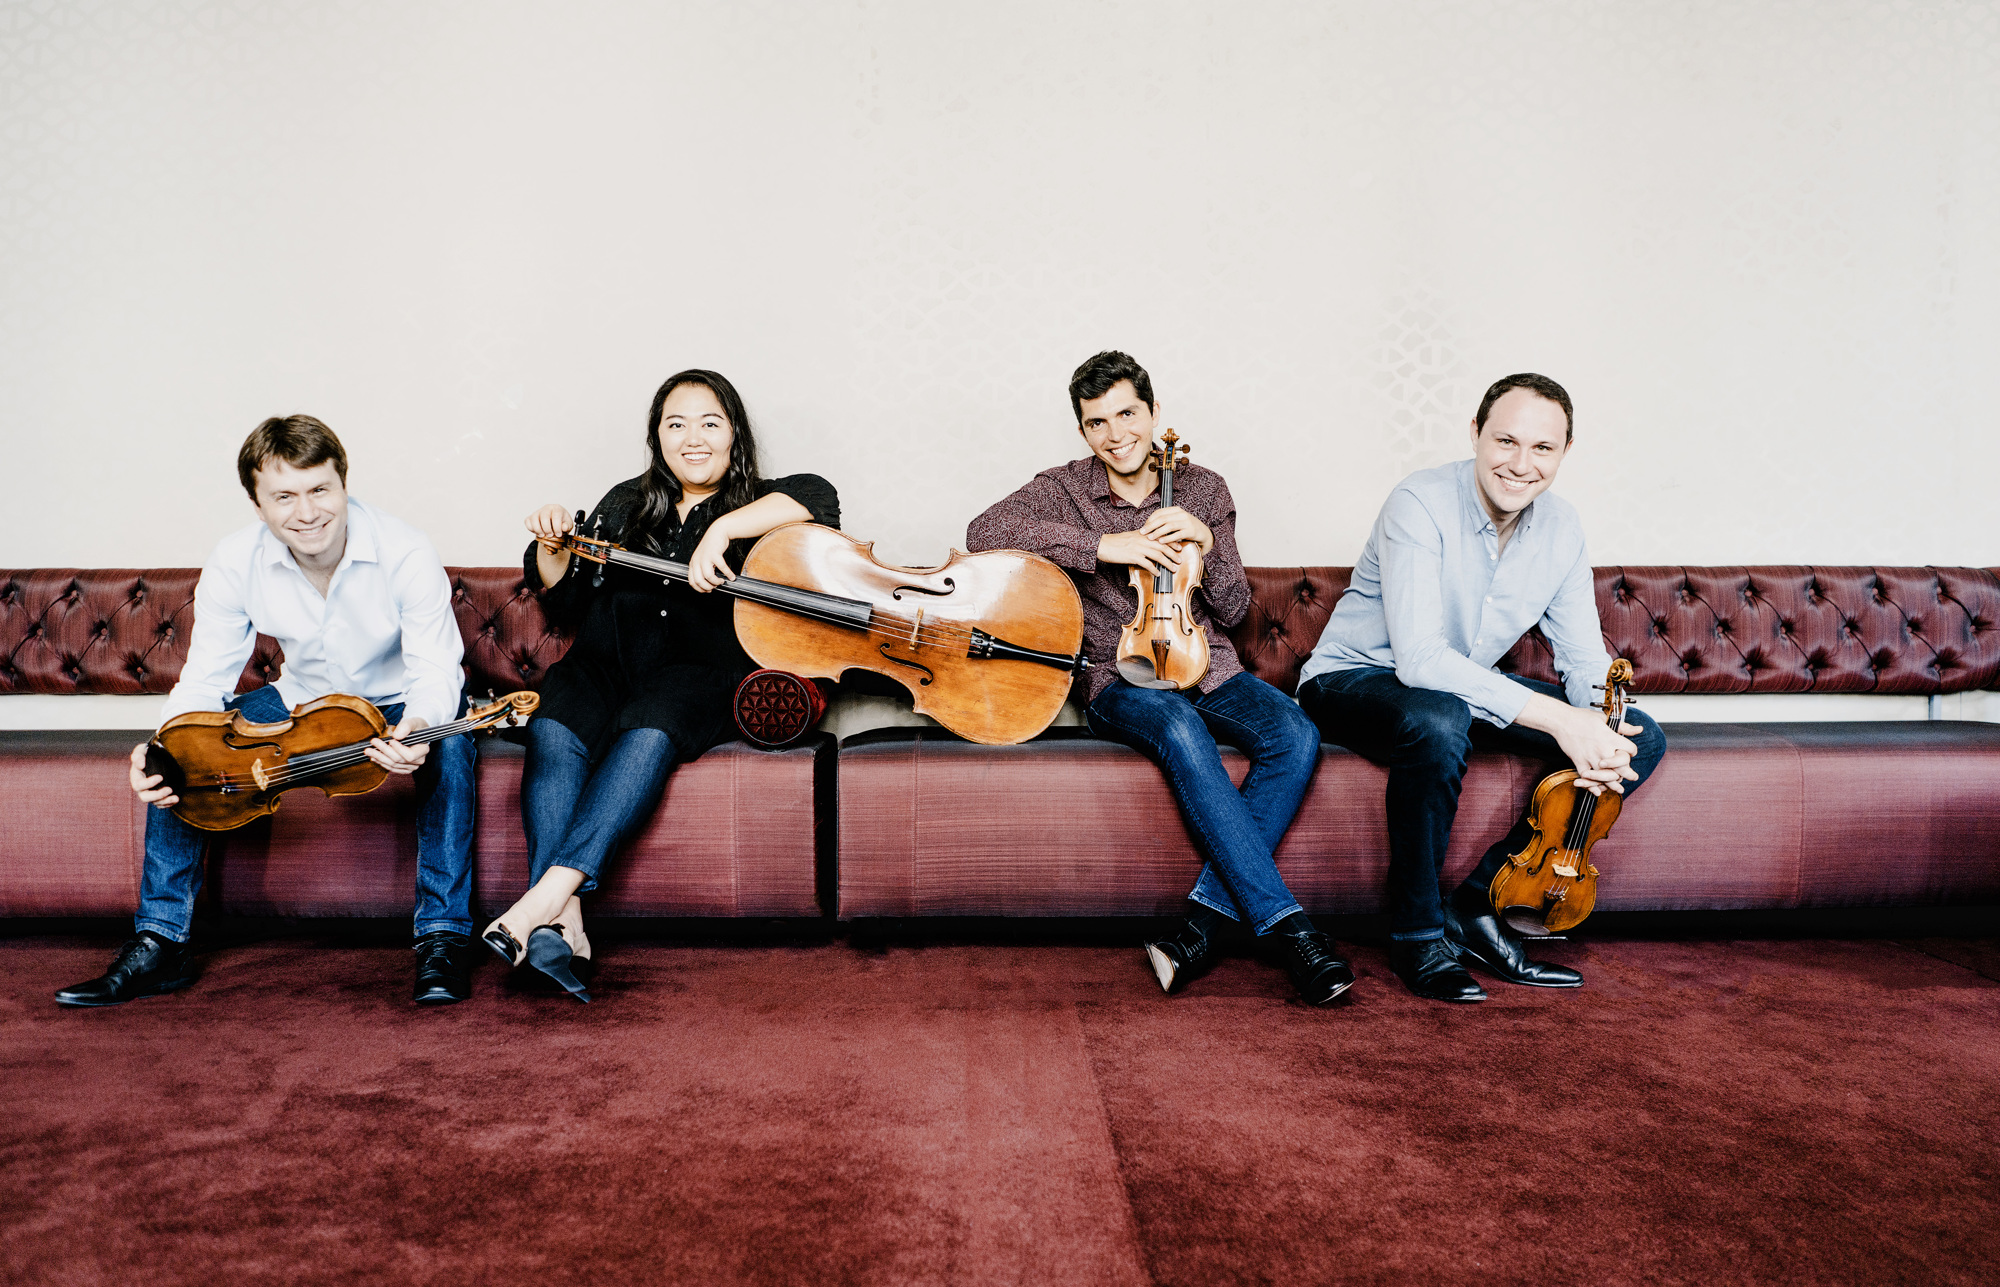 The Calidore String Quartet will serve as guests of honor at the opening event of the Sarasota Music Festival.